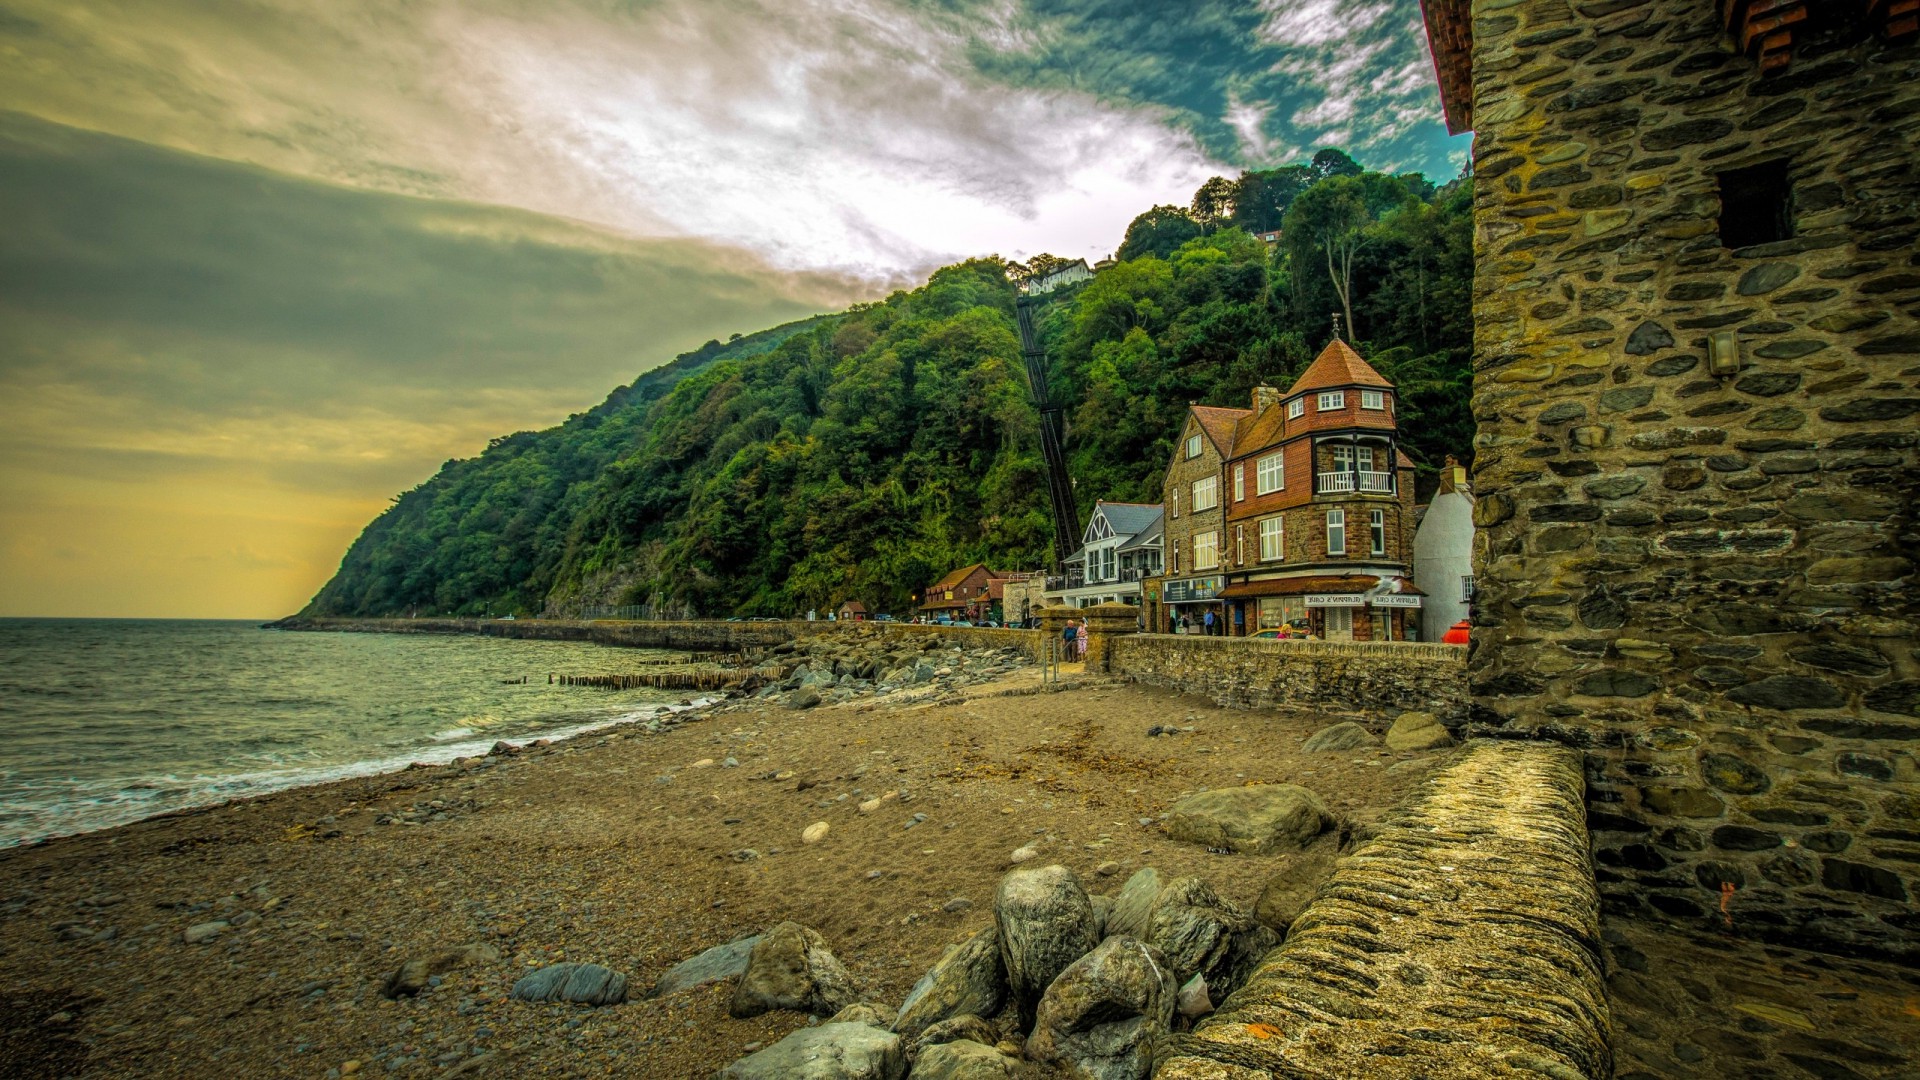 nature, Landscape, England, UK, Coast, Sea, Trees, Forest, Rock, Stones, Sand, Beach, House, HDR, Hill, Europe, Overcast, Architecture, Old Building, Building Wallpaper